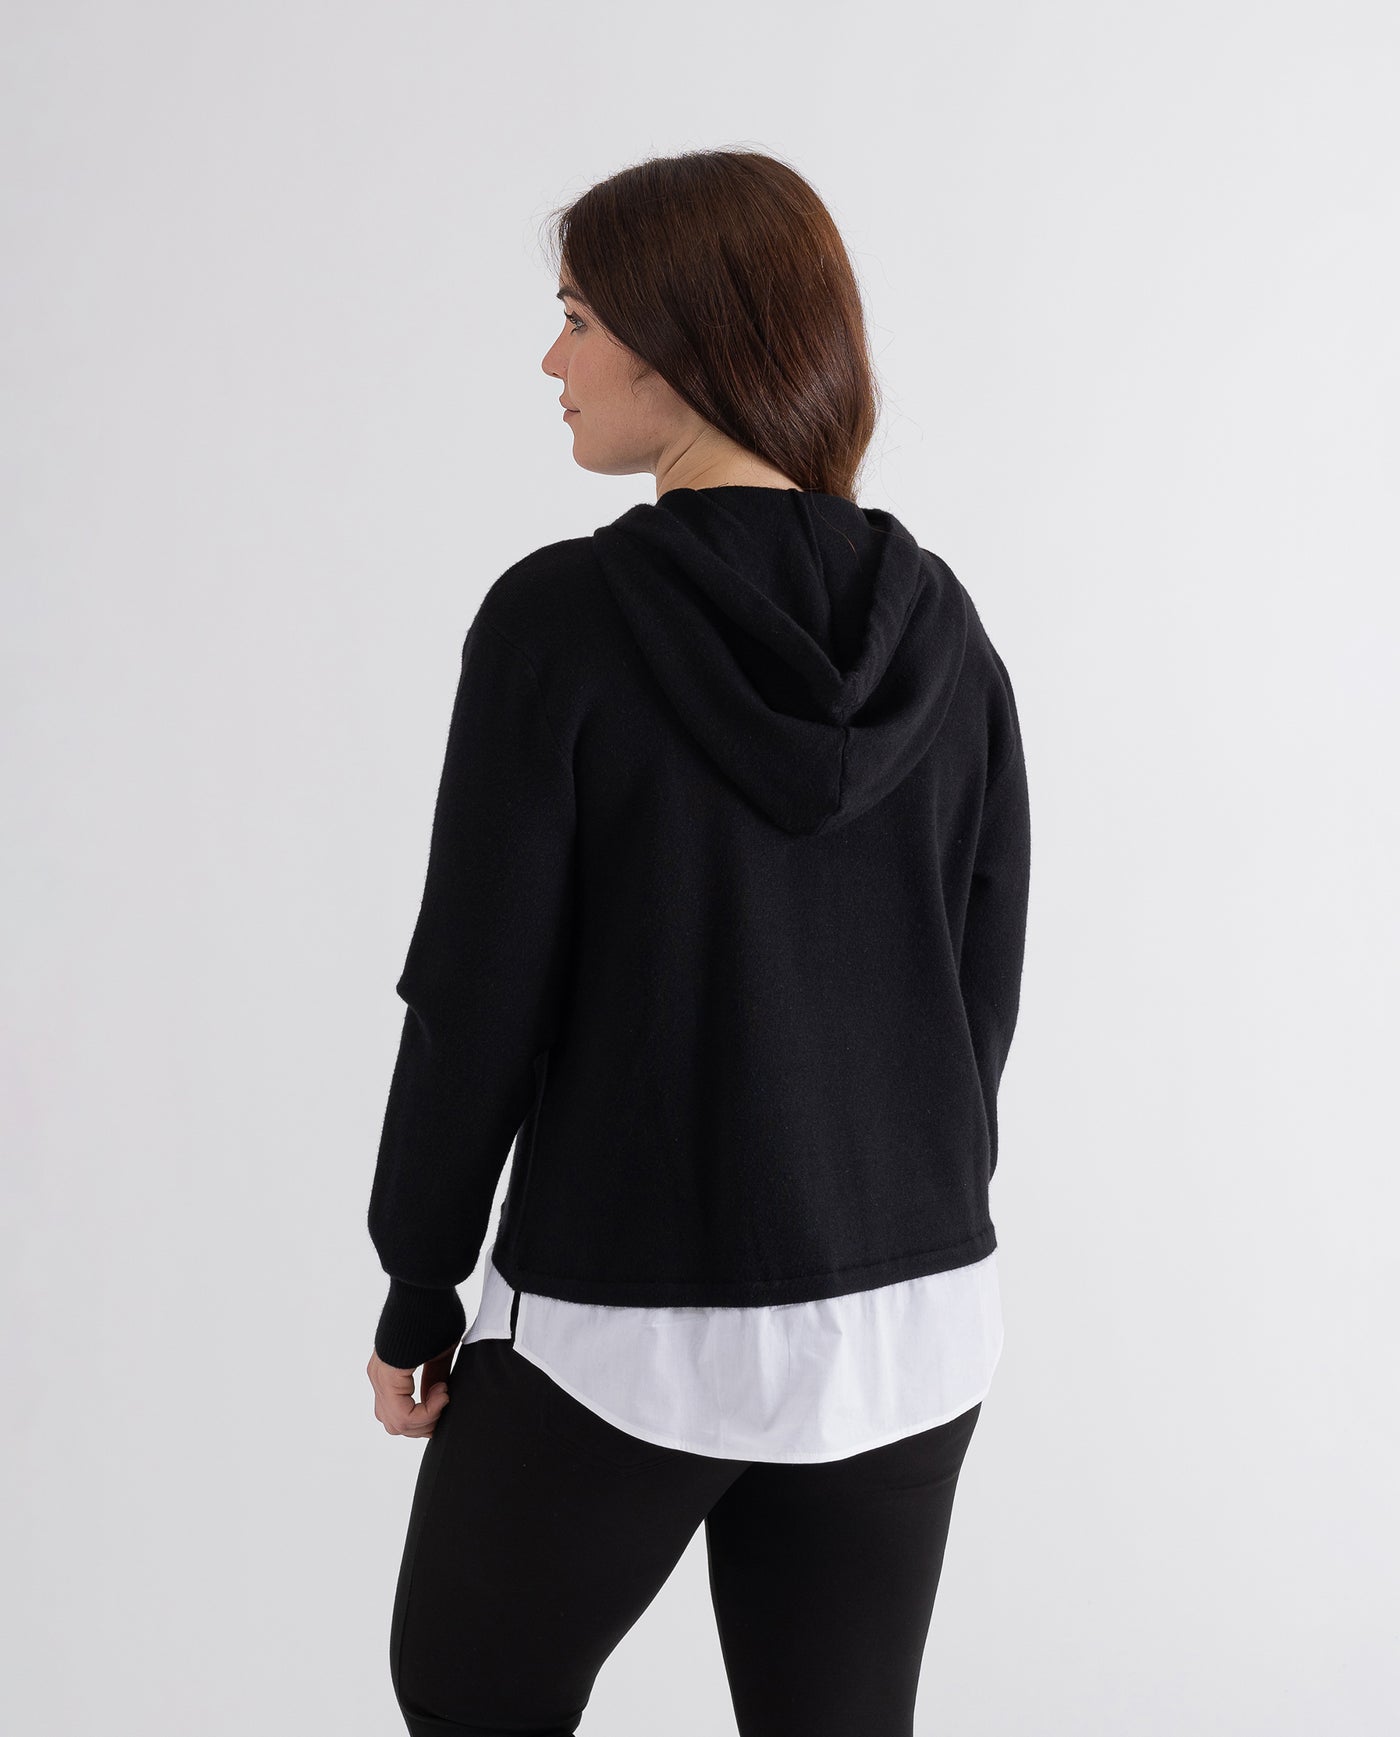 KNIT SWEATSHIRT WITH STRASS RIBBONS AND BLACK SKIRT